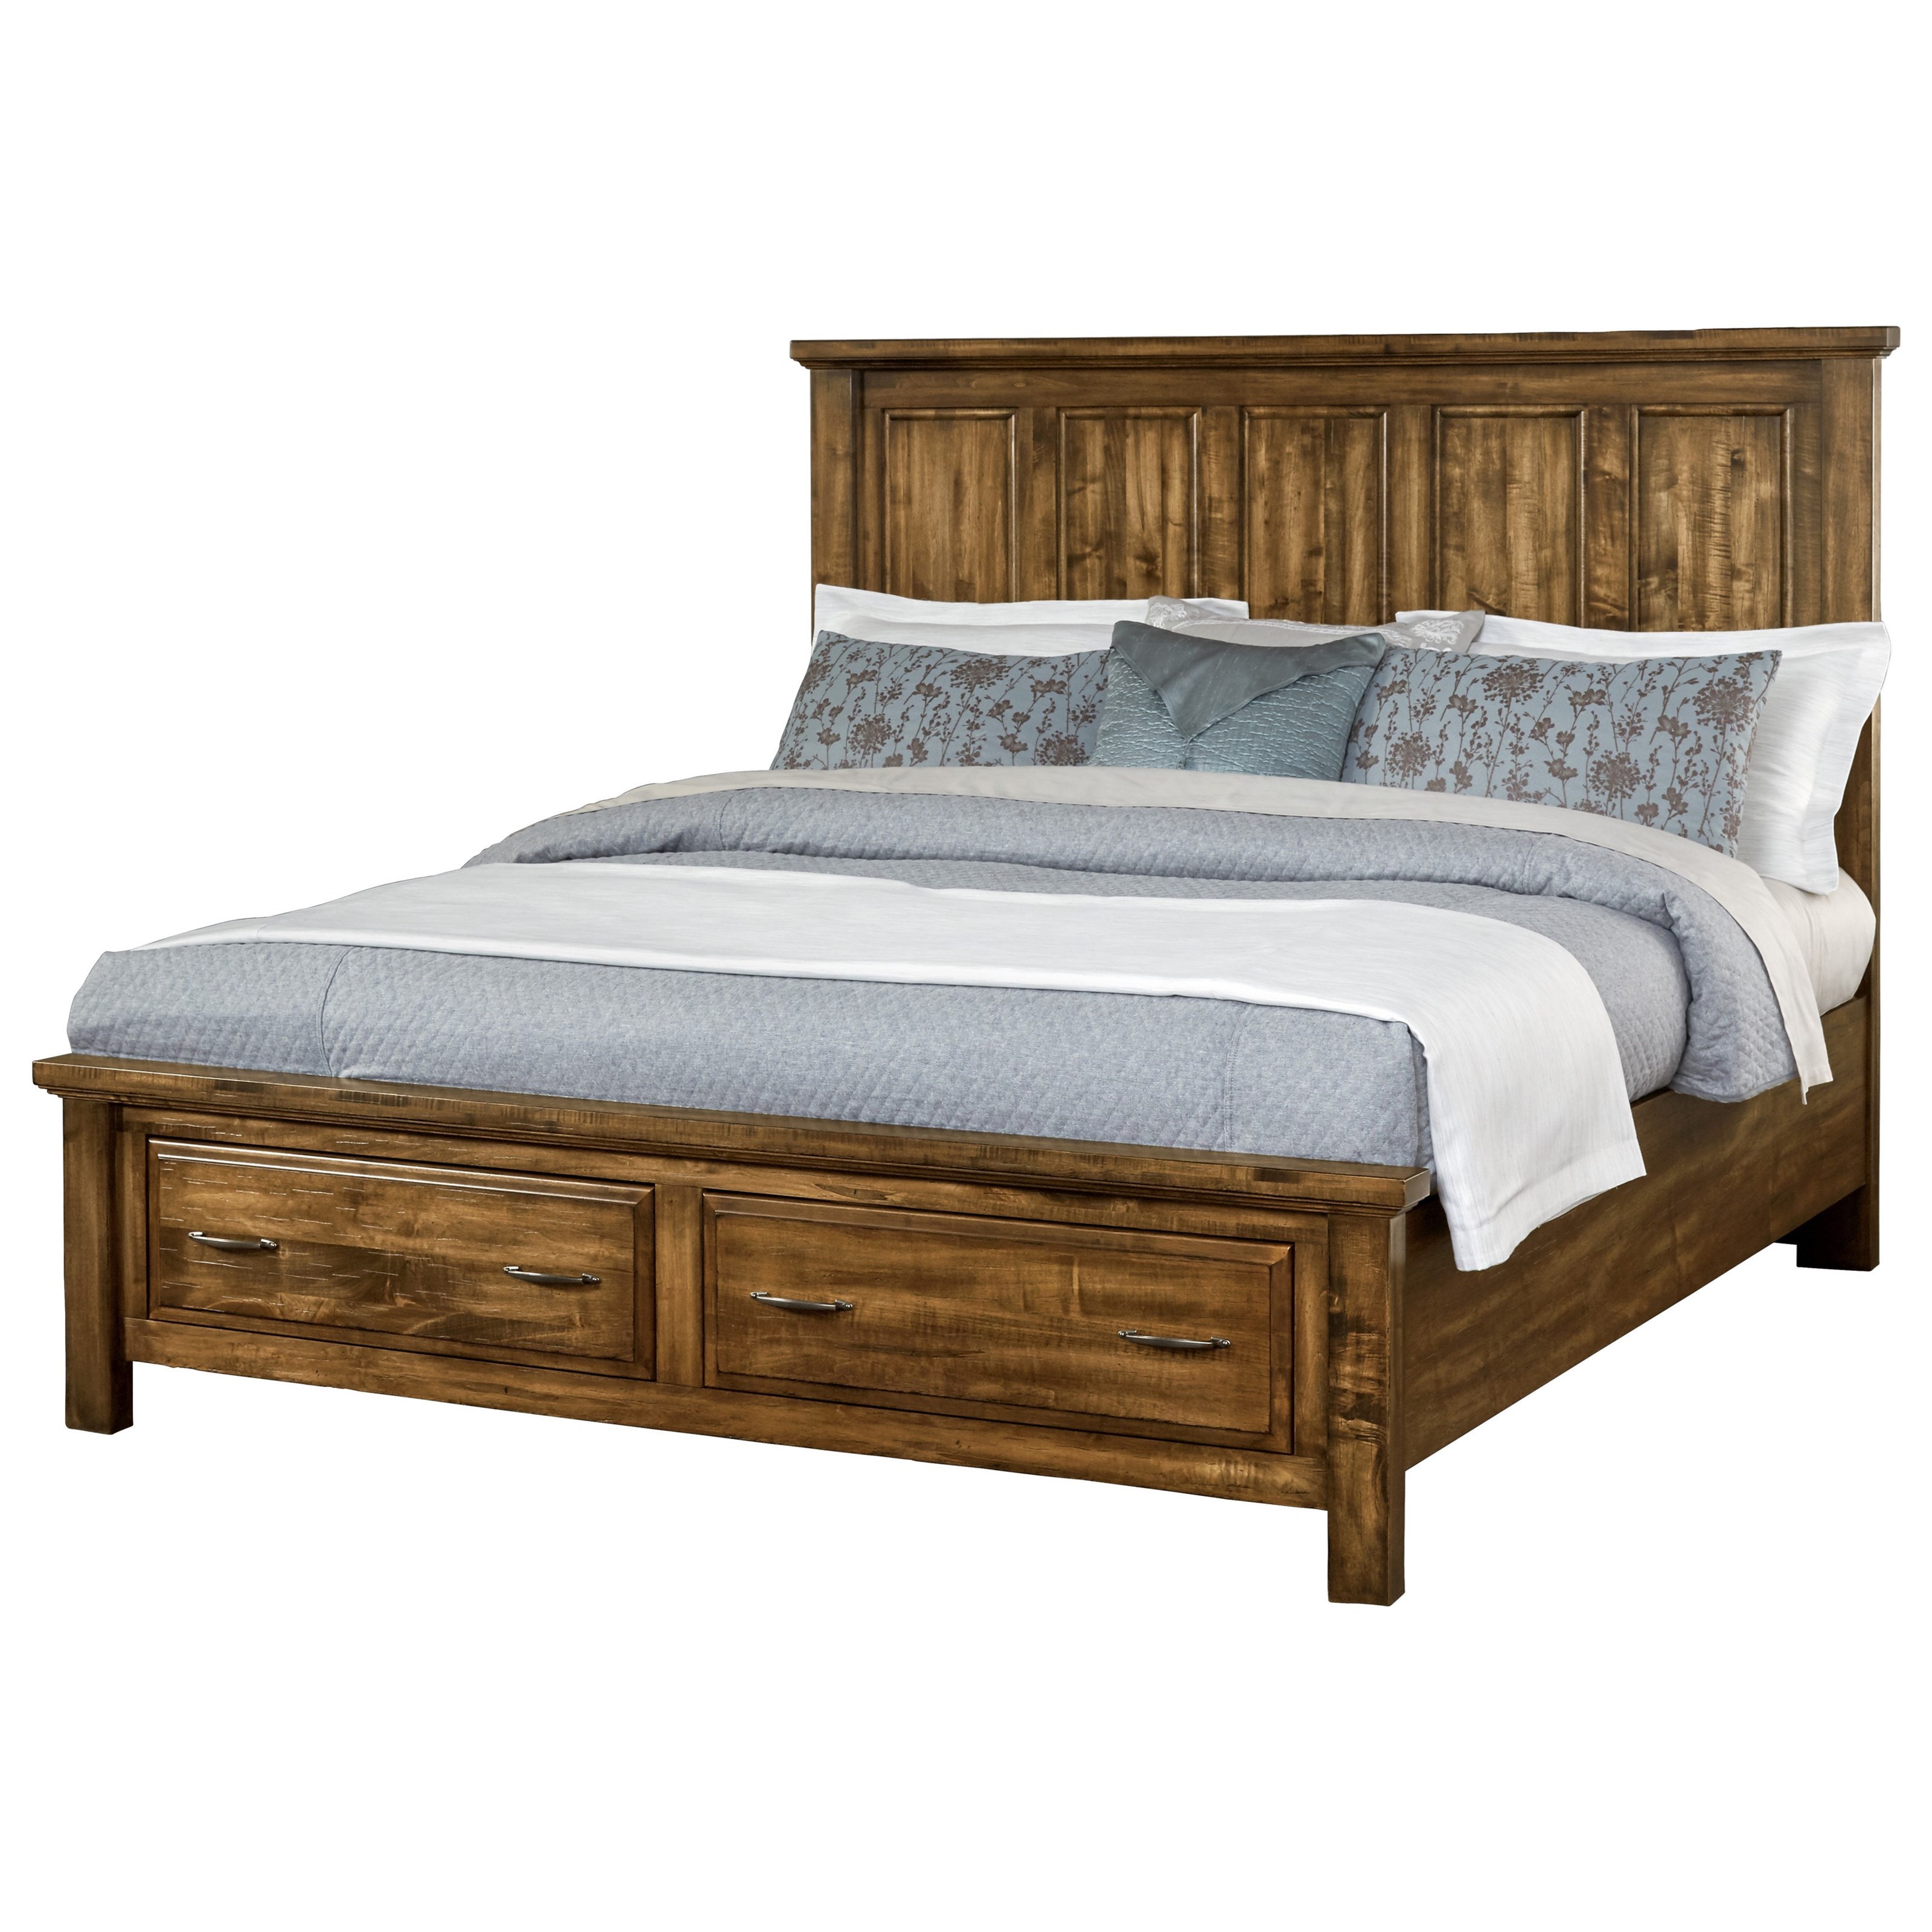 Queen Full Size Bed Frame Wood Bedroom Furniture Platform With 2 Drawers Storage 